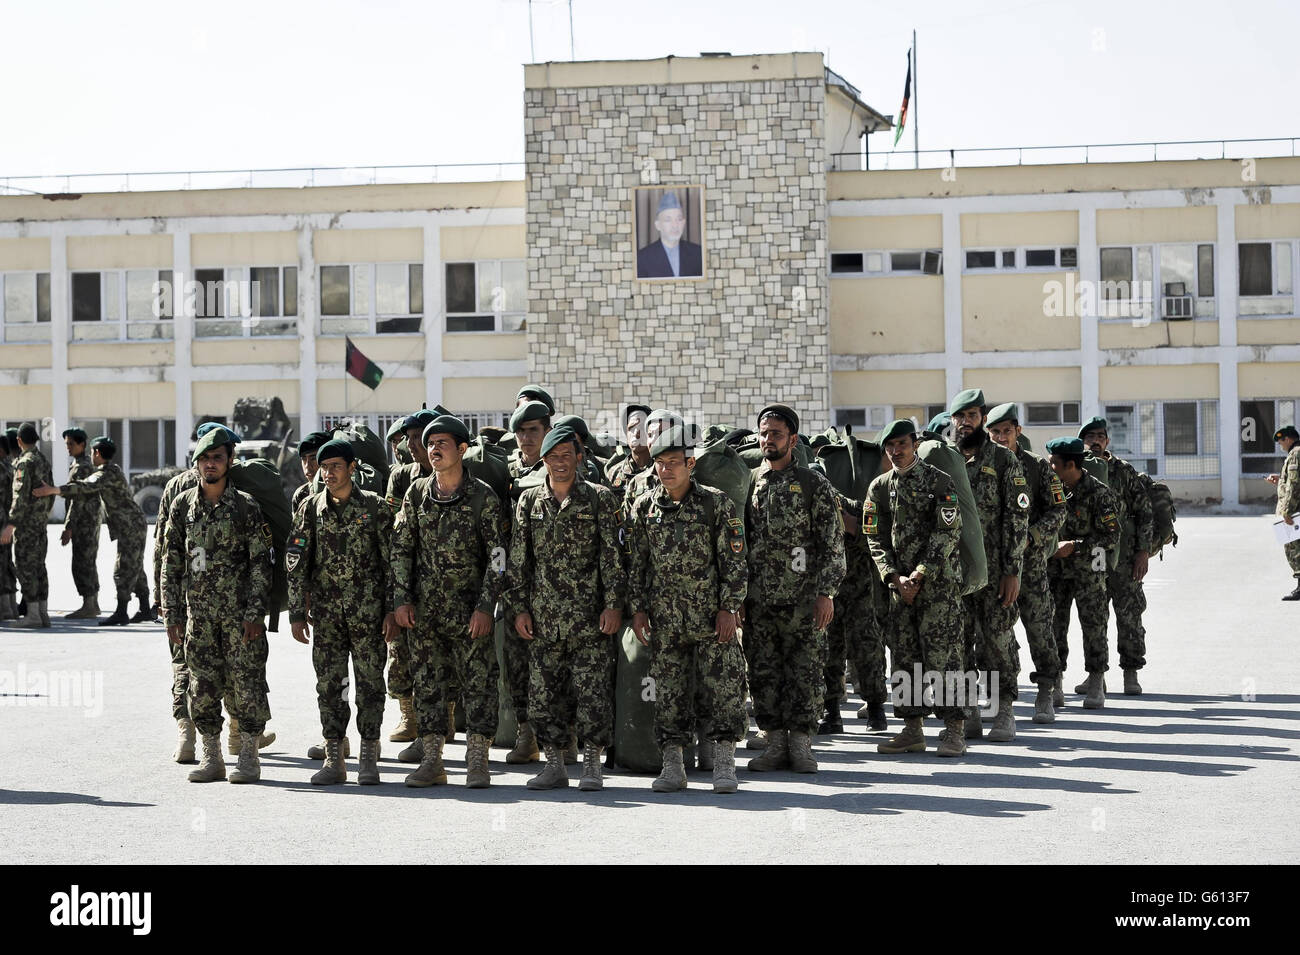 Some of the 170 Afghan National Army Non Commissioned Officers form up in the parade square at the Kabul Military Training Centre, Kabul, Afghanistan, after their formal graduation ceremony to await orders and be assigned to a field unit before being deployed into theatre to fight the Taliban. Stock Photo